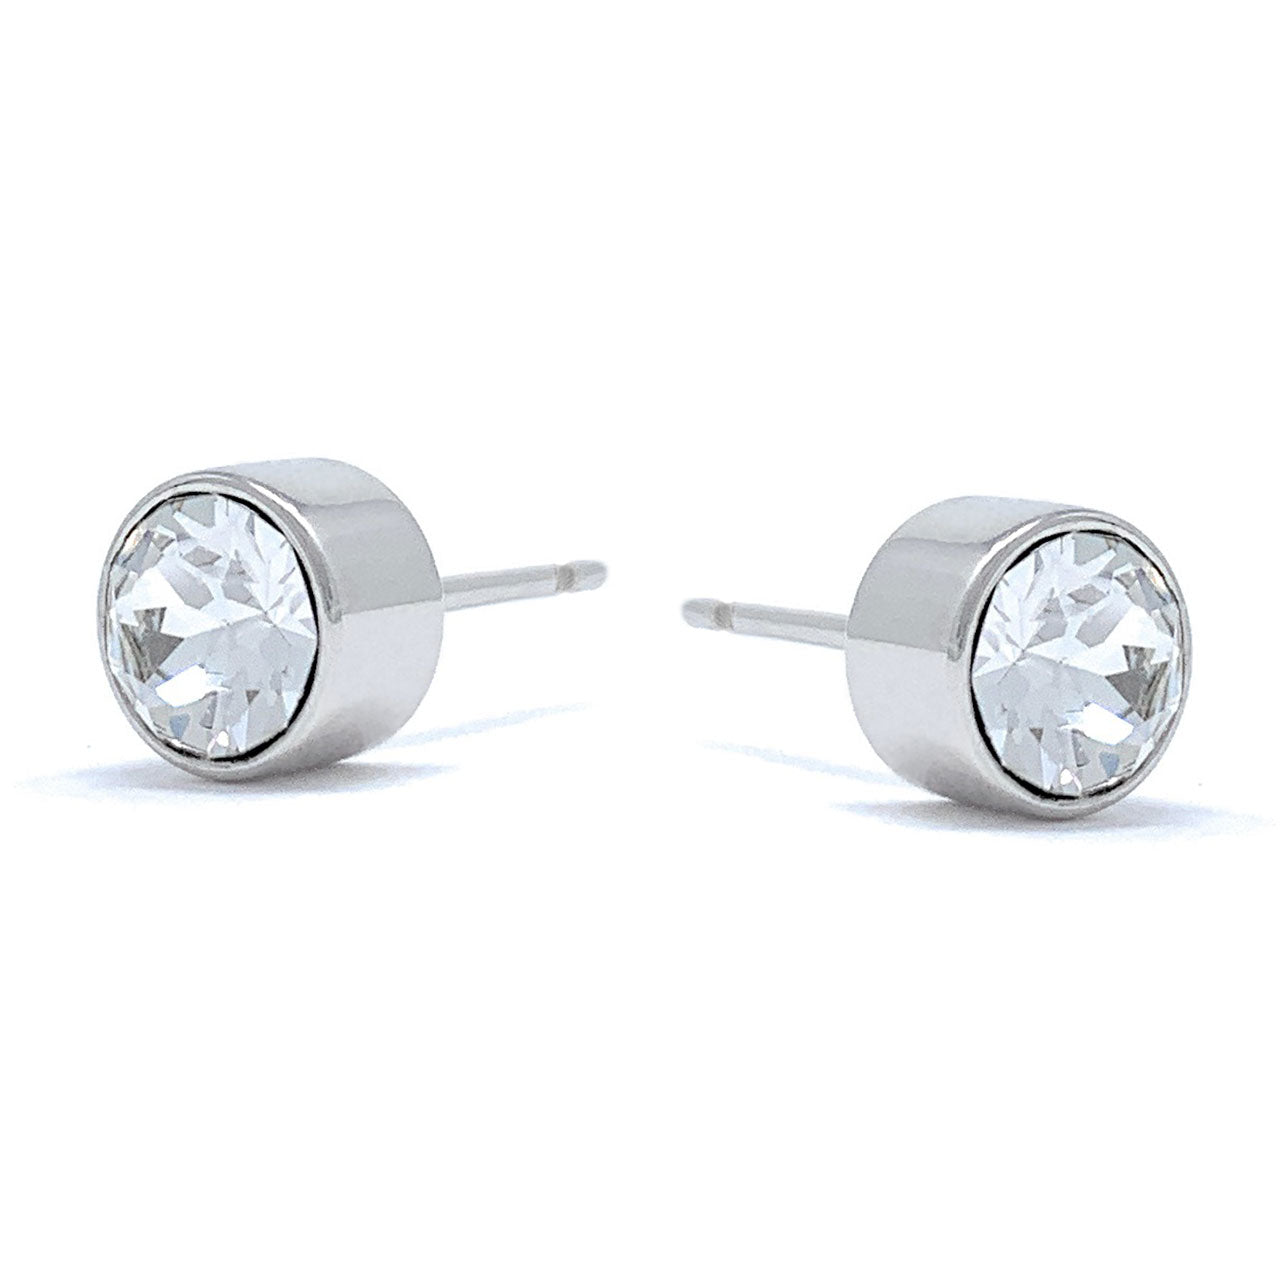 Harley Small Stud Earrings with White Clear Round Crystals from Swarovski Silver Toned Rhodium Plated - Ed Heart